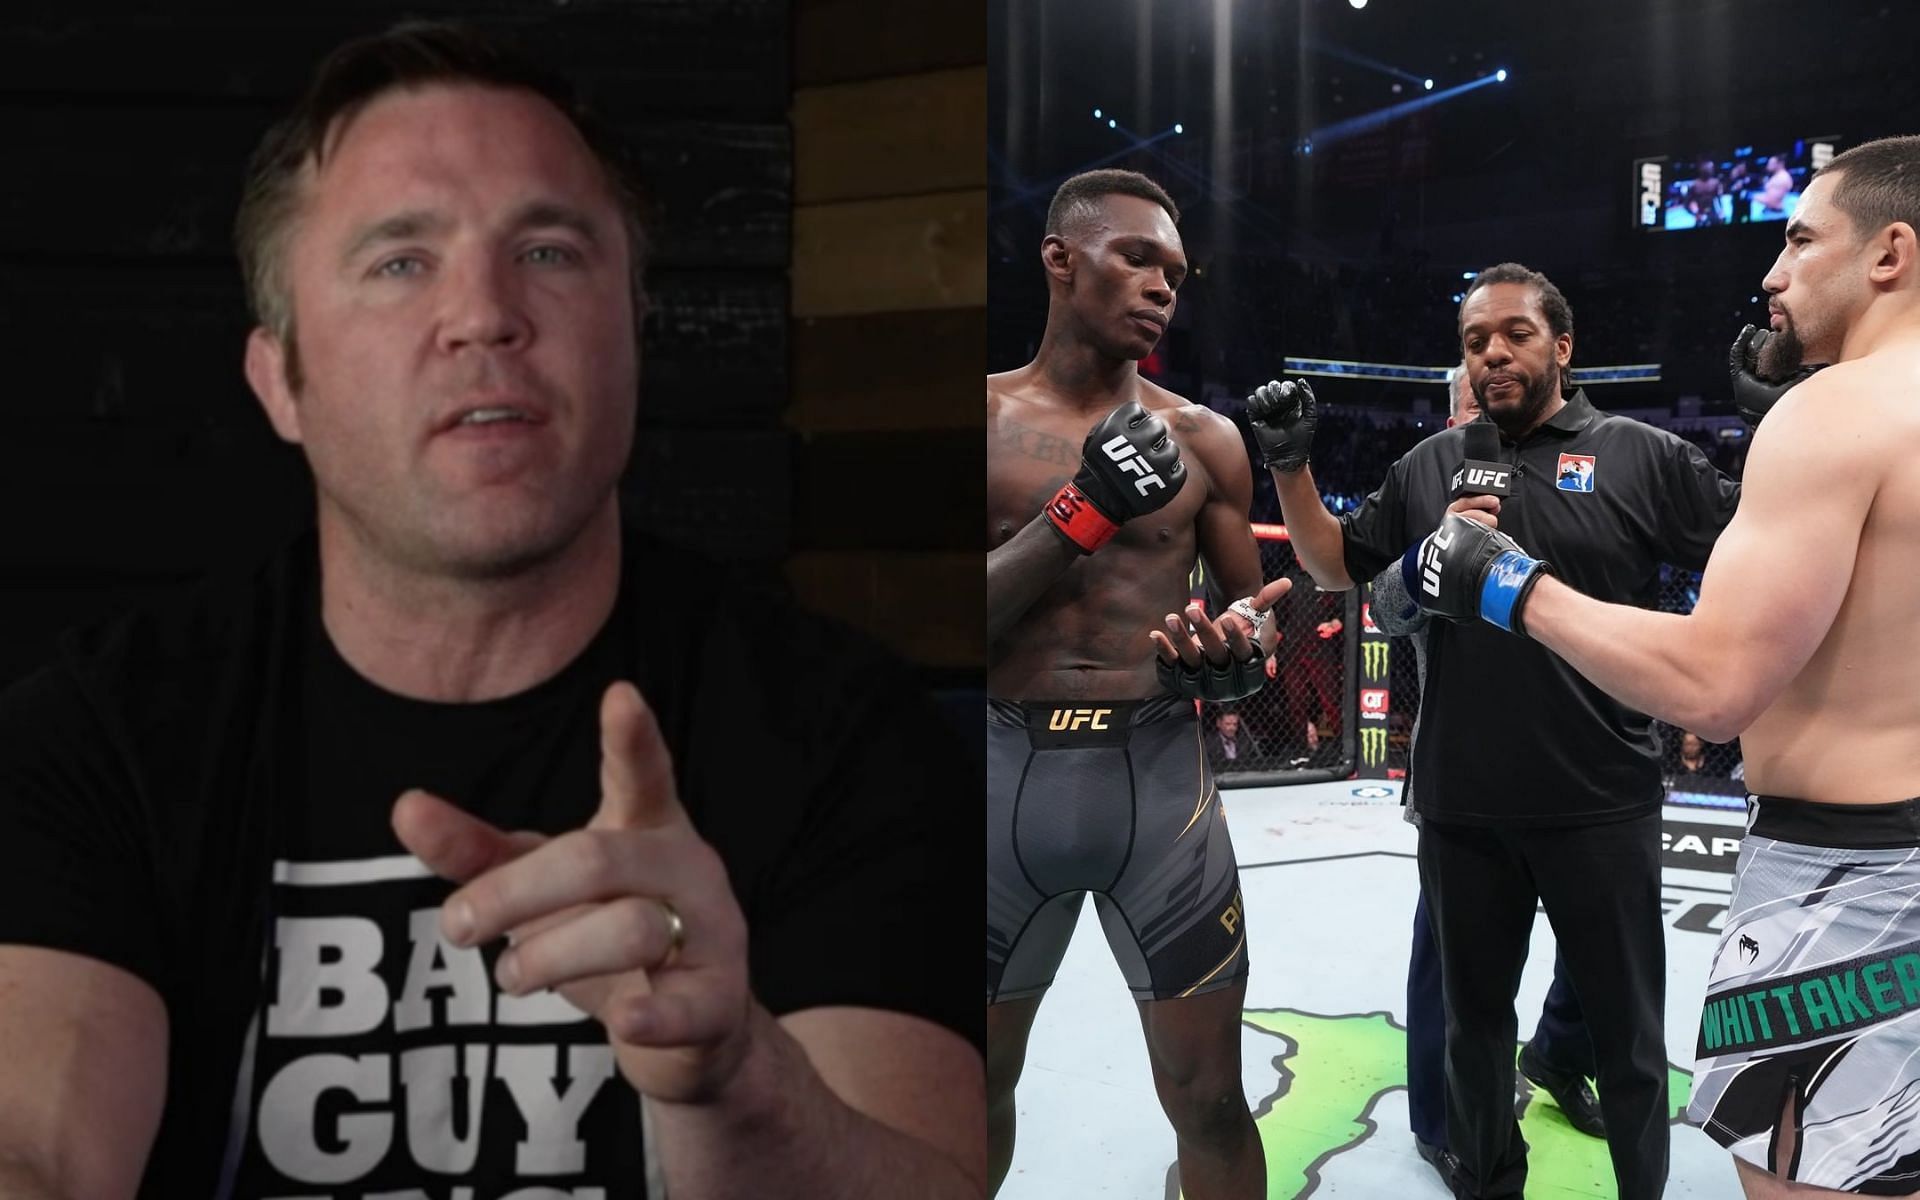 Chael Sonnen (left), Israel Adesanya and Robert Whittaker (right) [Image credits: @sonnench and @ufc]